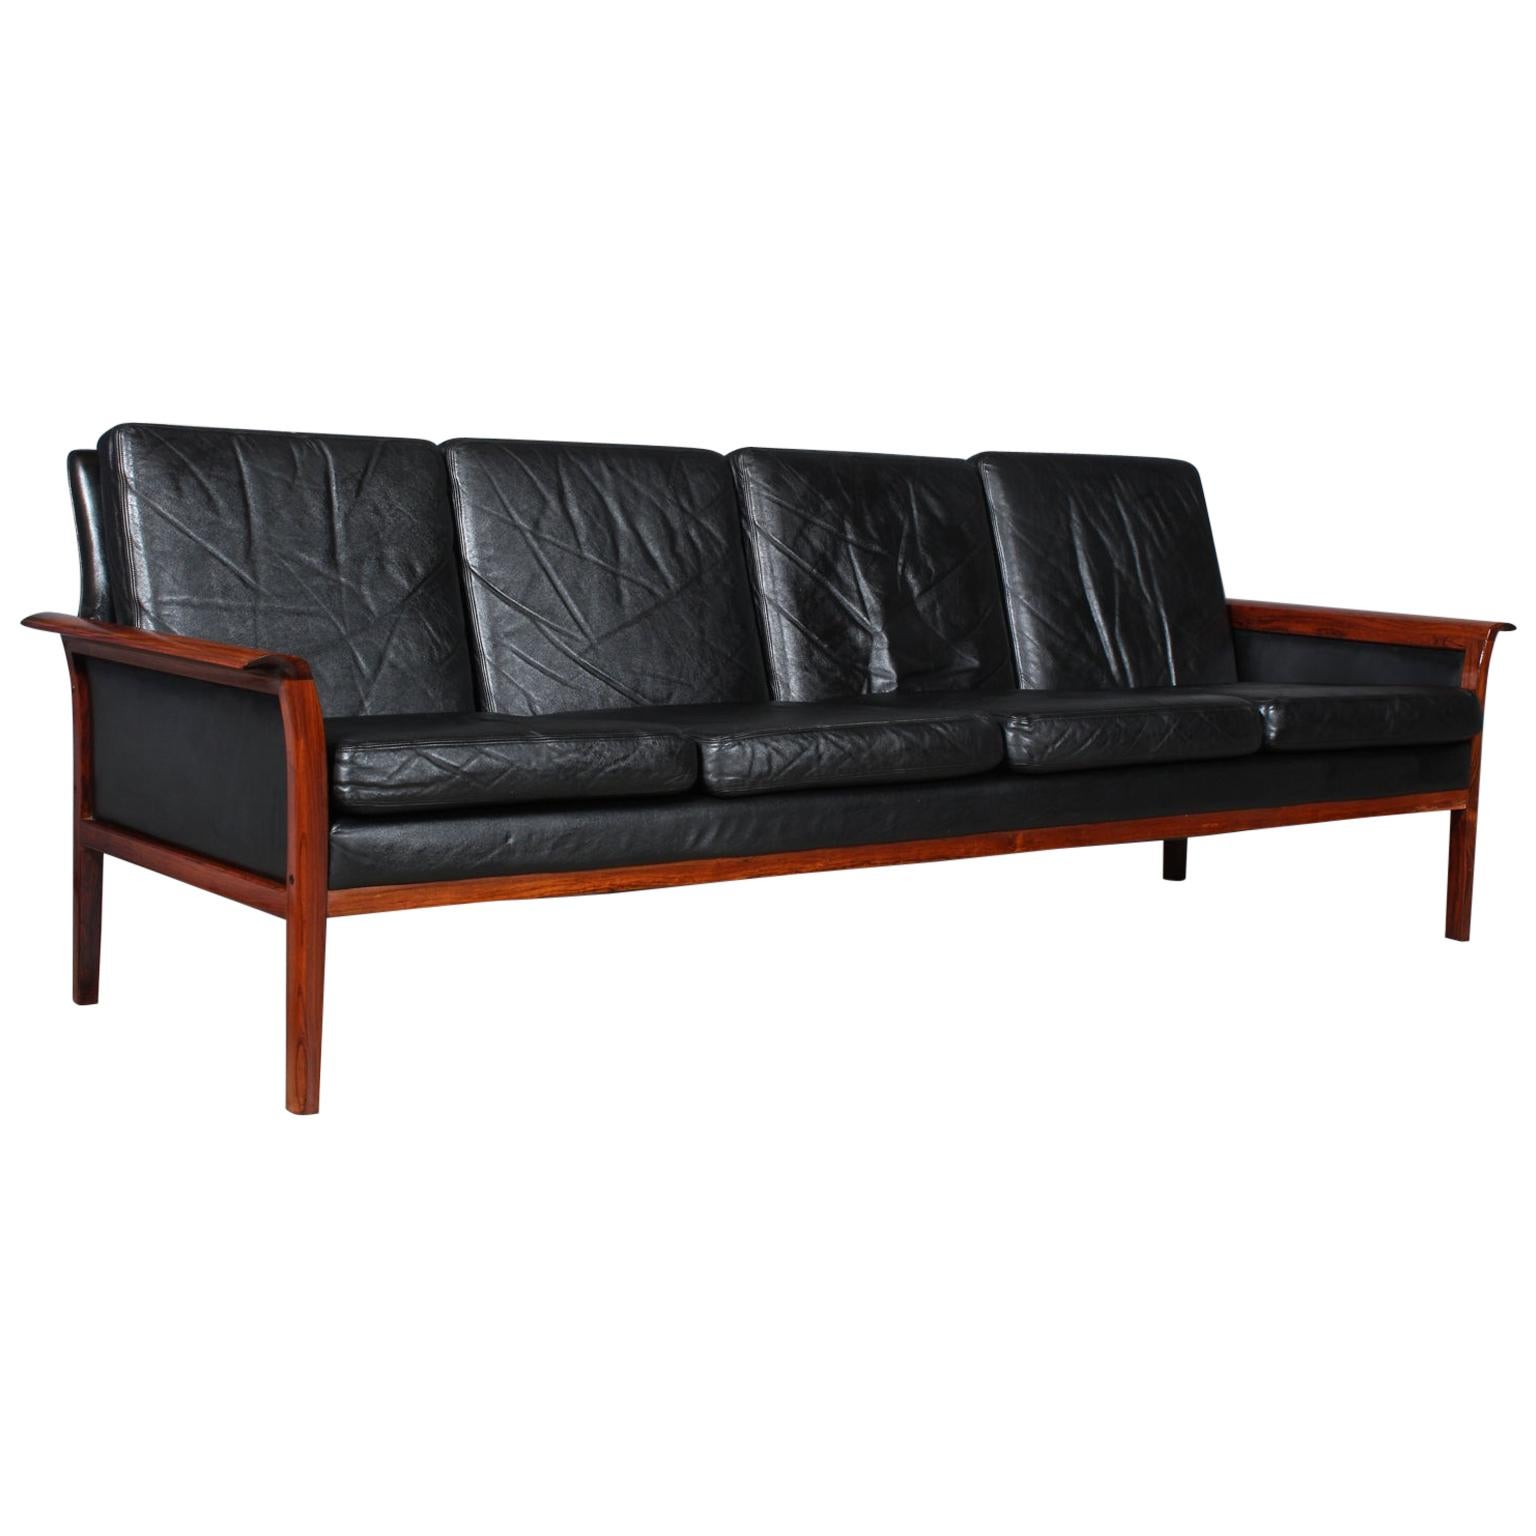 Frederik Kayser Four-Seat Sofa, Rosewood and Leather, Norway